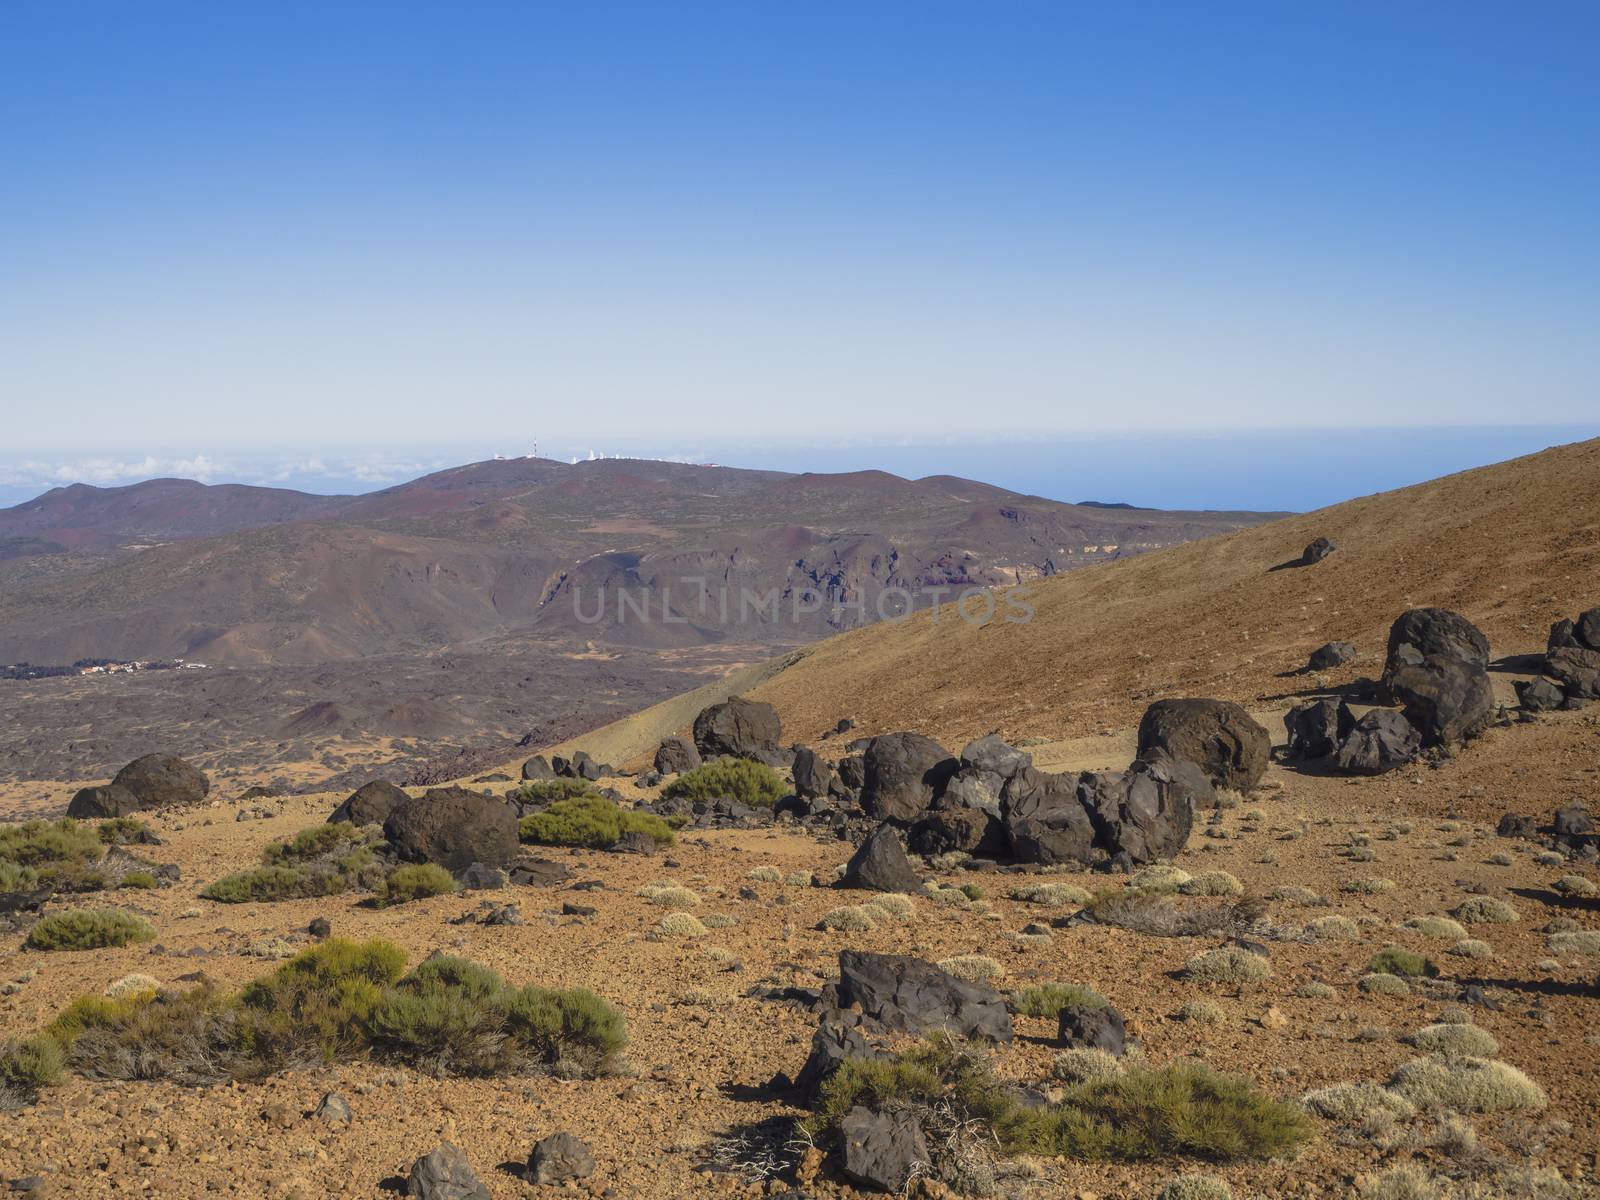 desert volcanic landscape with purple mountains in el teide national nature park with Huevos del Teide (Eggs of Teide) accretionary lava balls on clear blue sky background